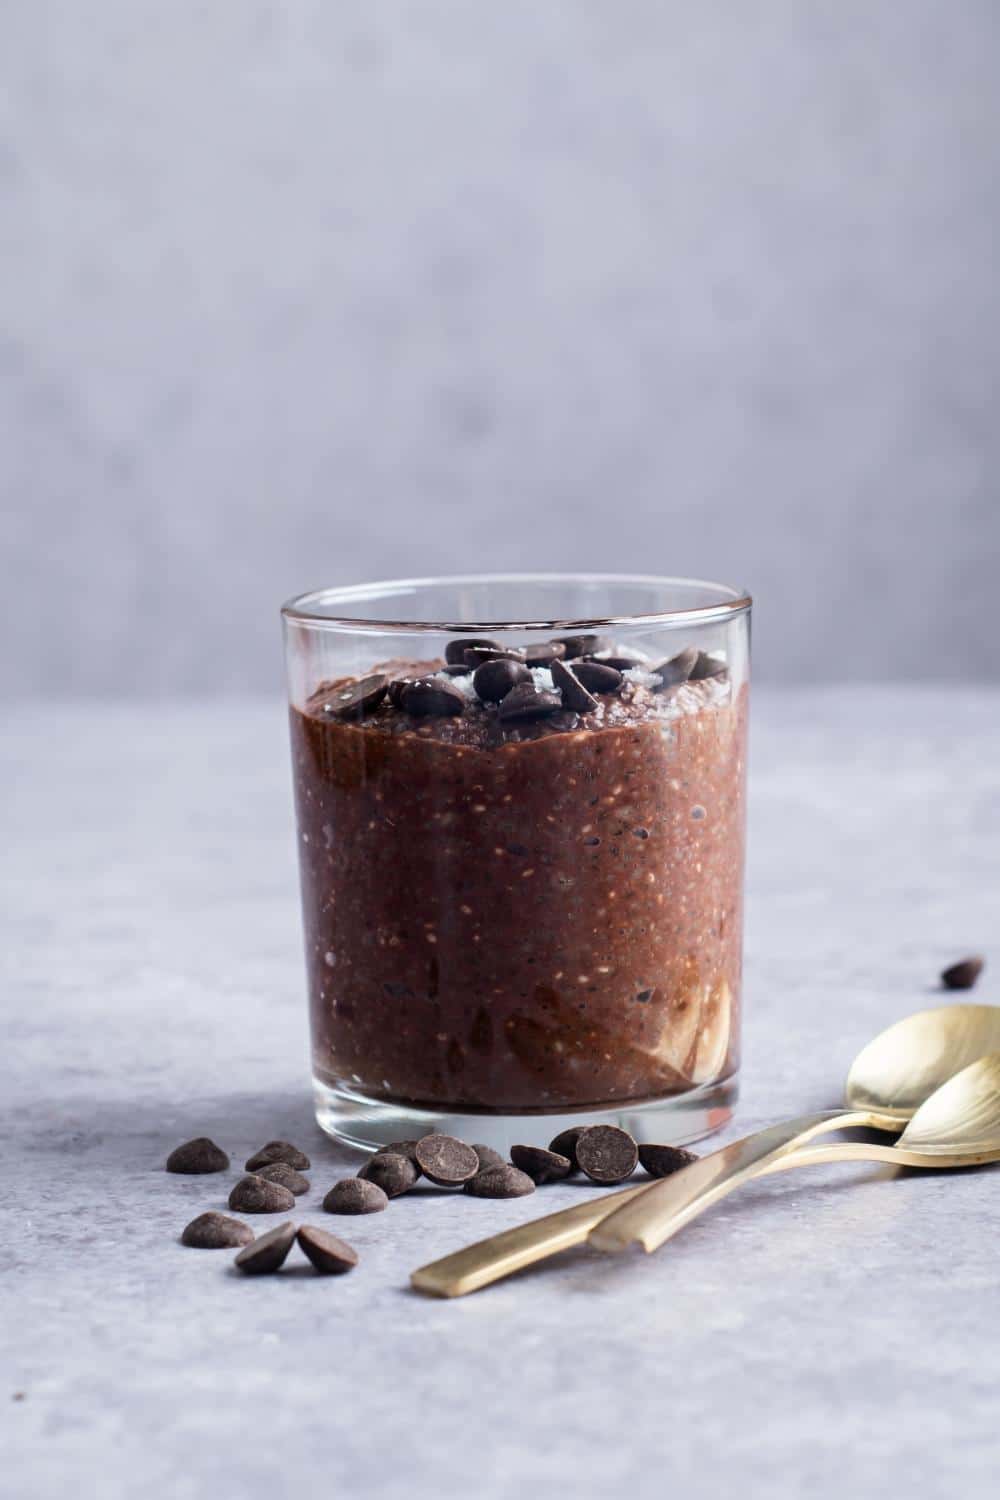 A cup that has chocolate protein pudding in it with chocolate chips on top.